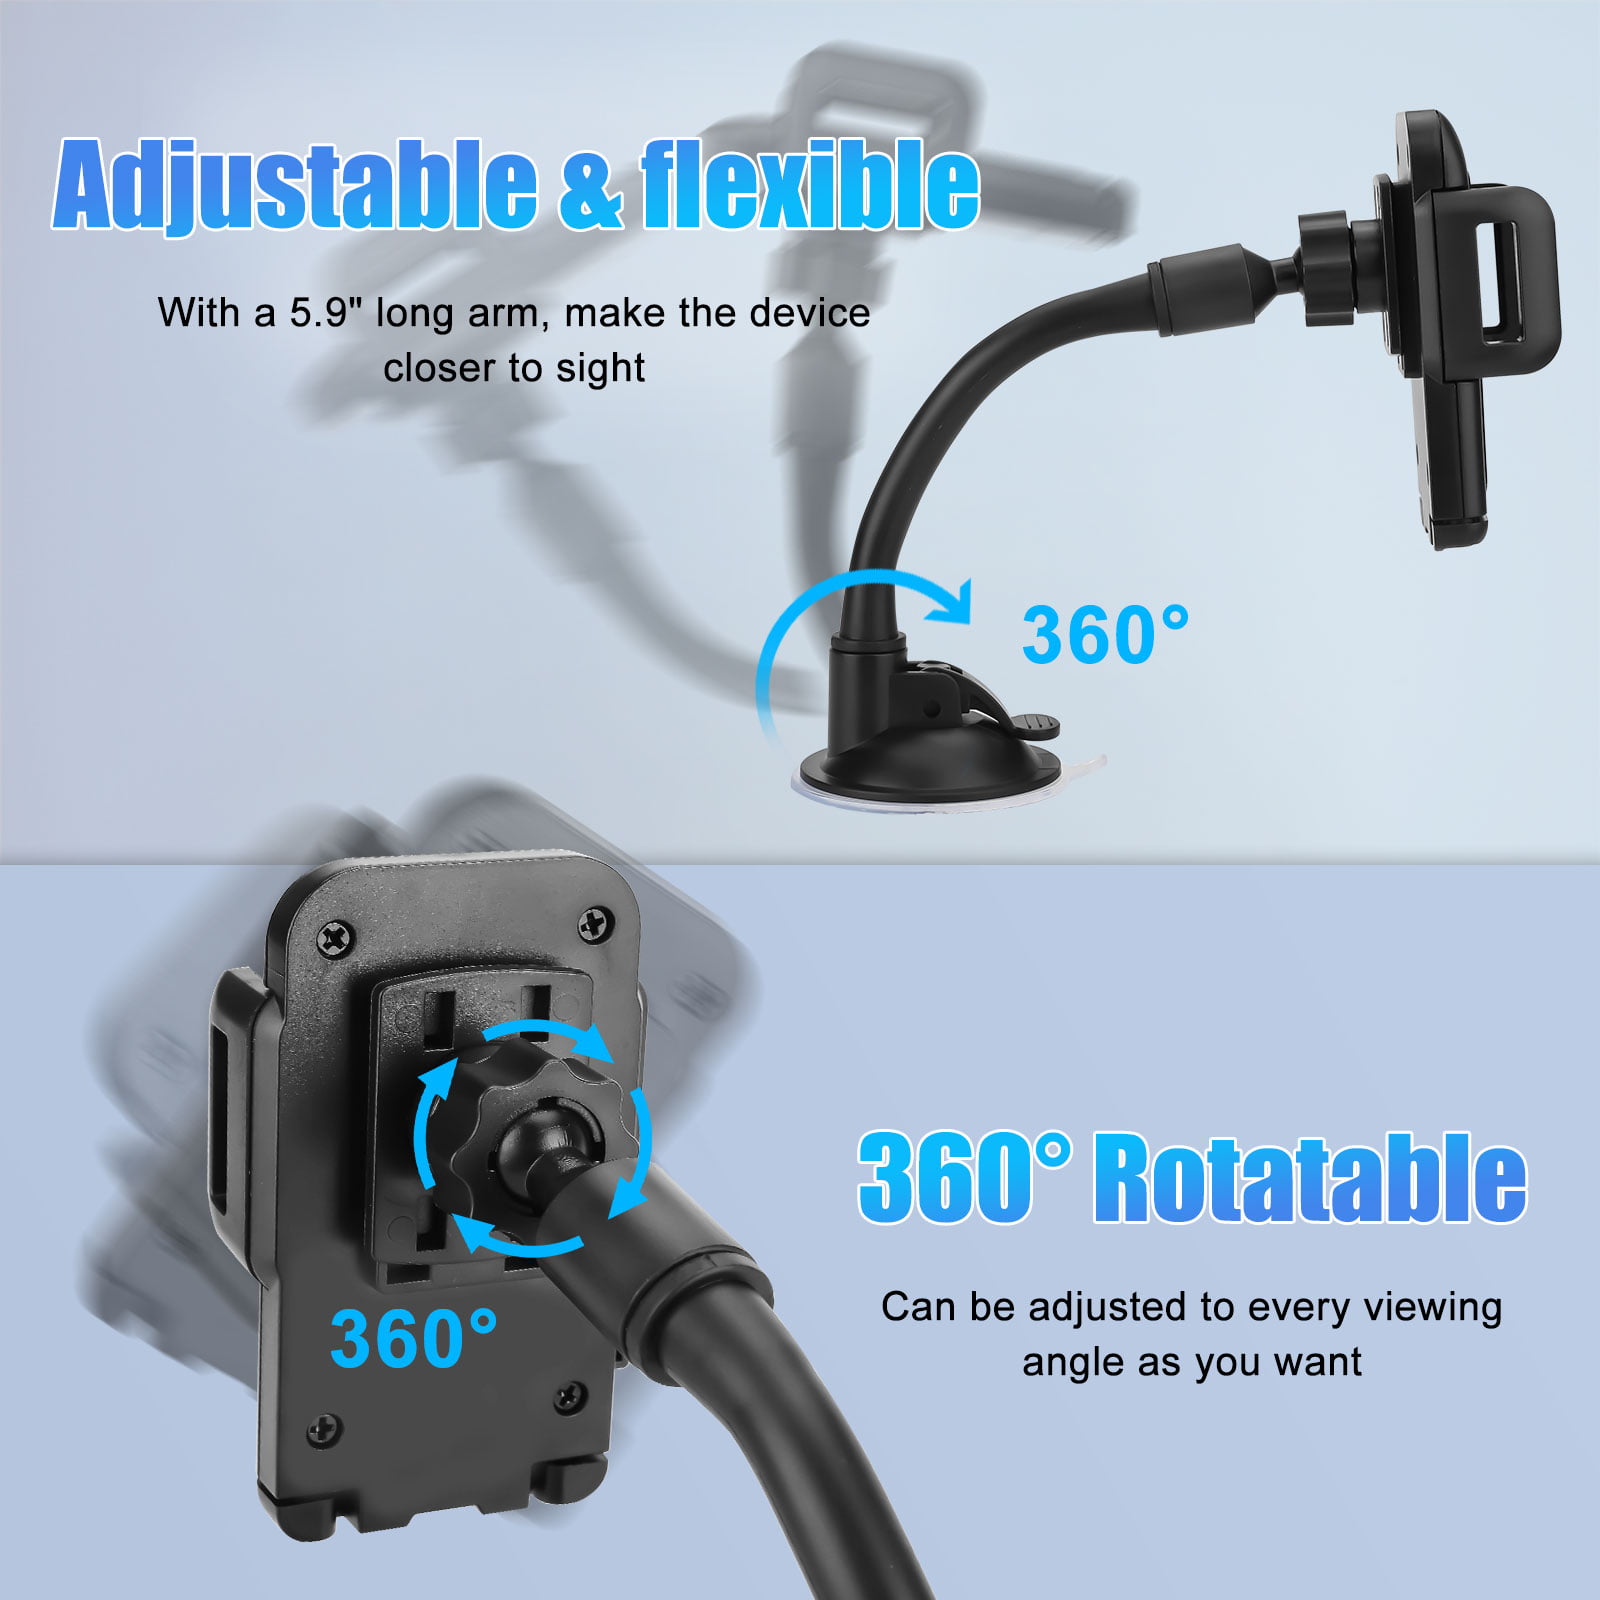 Kolasels Dual Phone Holder for Car, Phone Mount for Truck Windshield/Dashboard Compatible with iPhone 11/Xs/XR/X/8 Plus/8/7/6, Samsung Note 10+/10/9